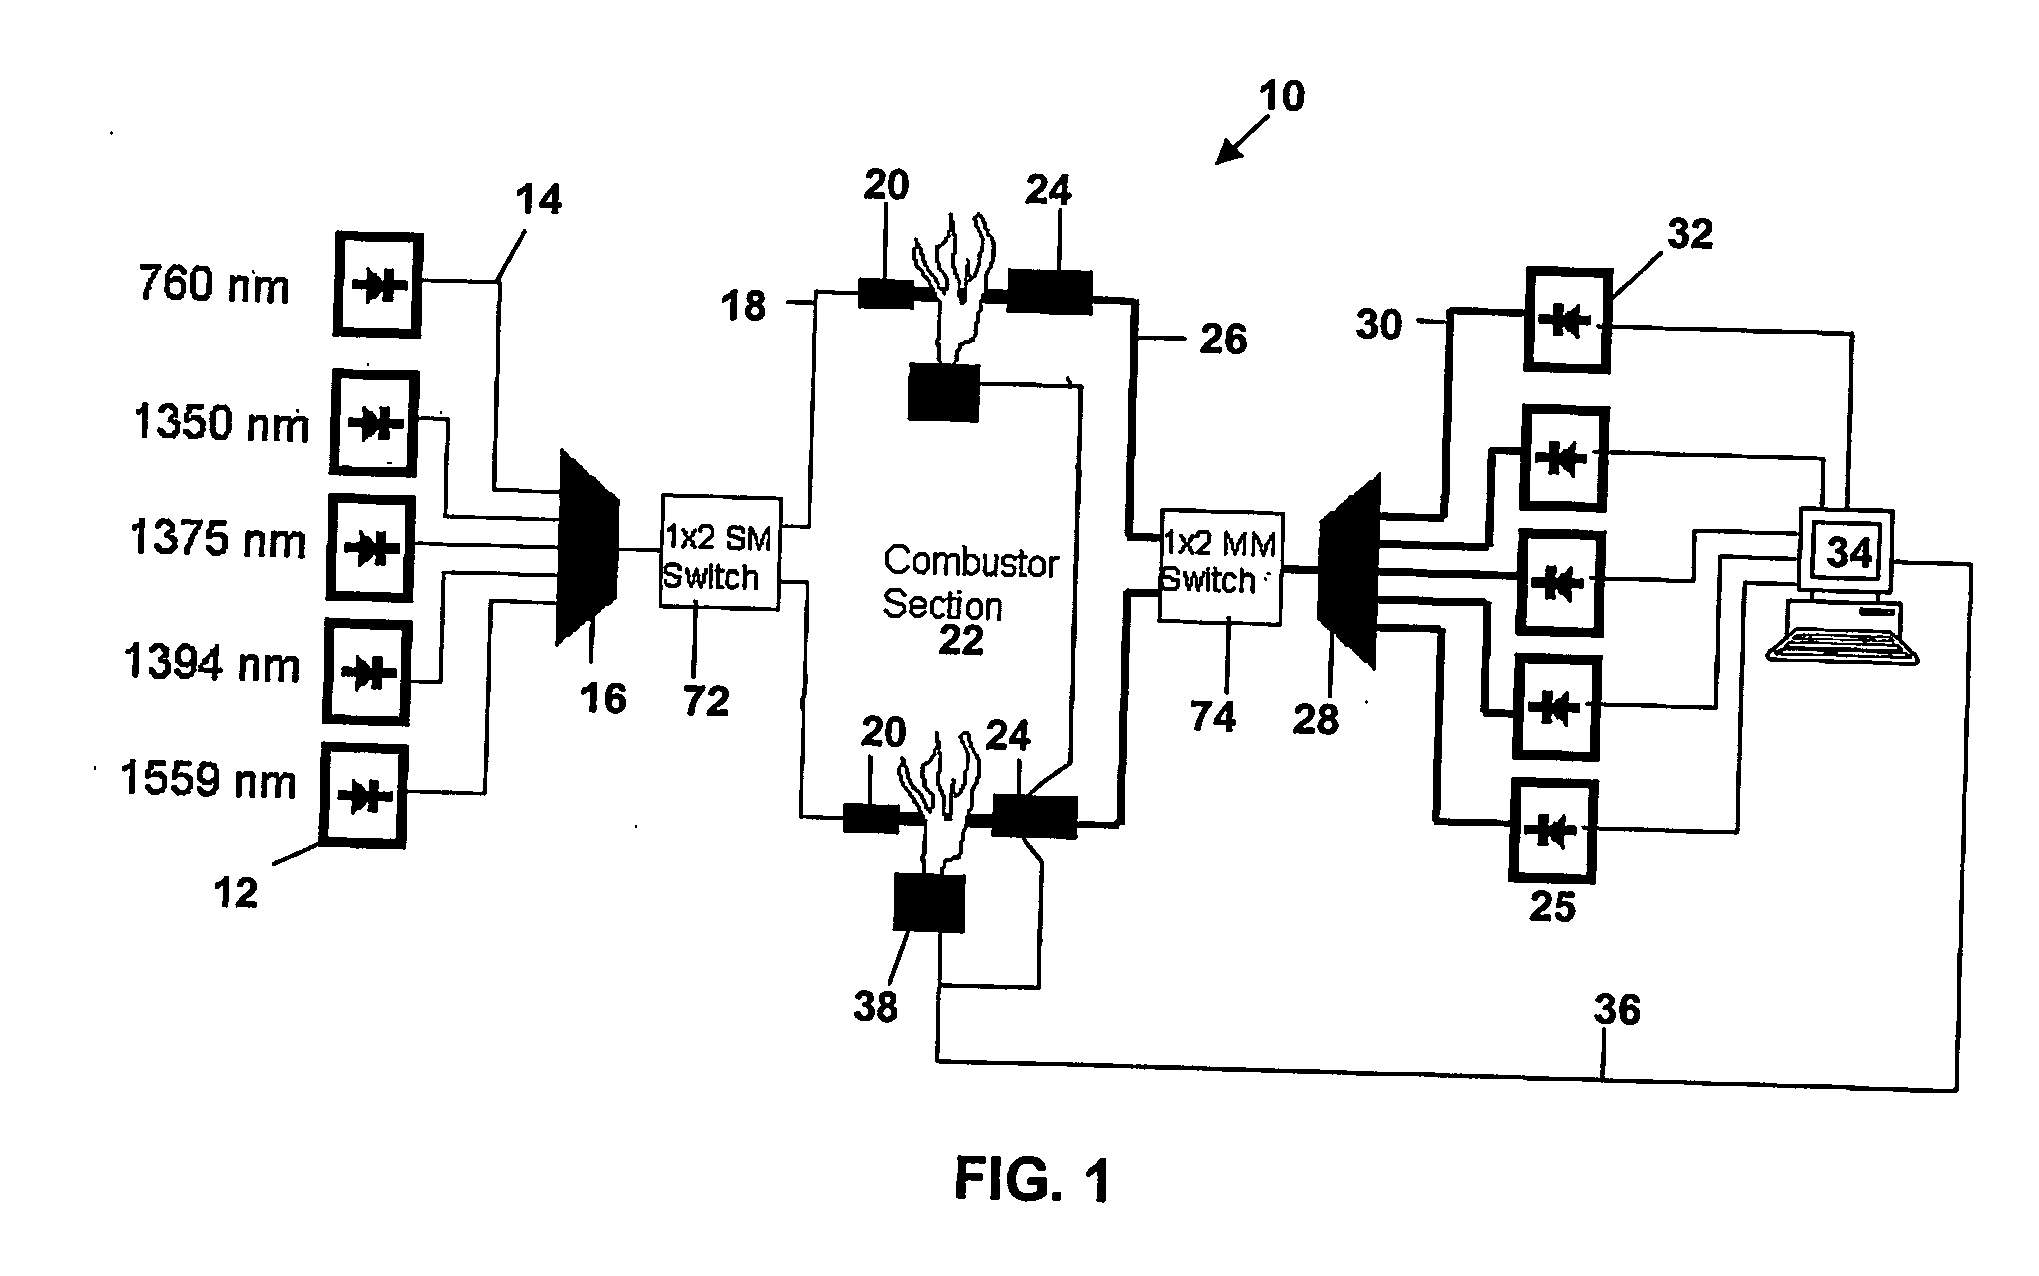 Method and apparatus for the monitoring and control of combustion